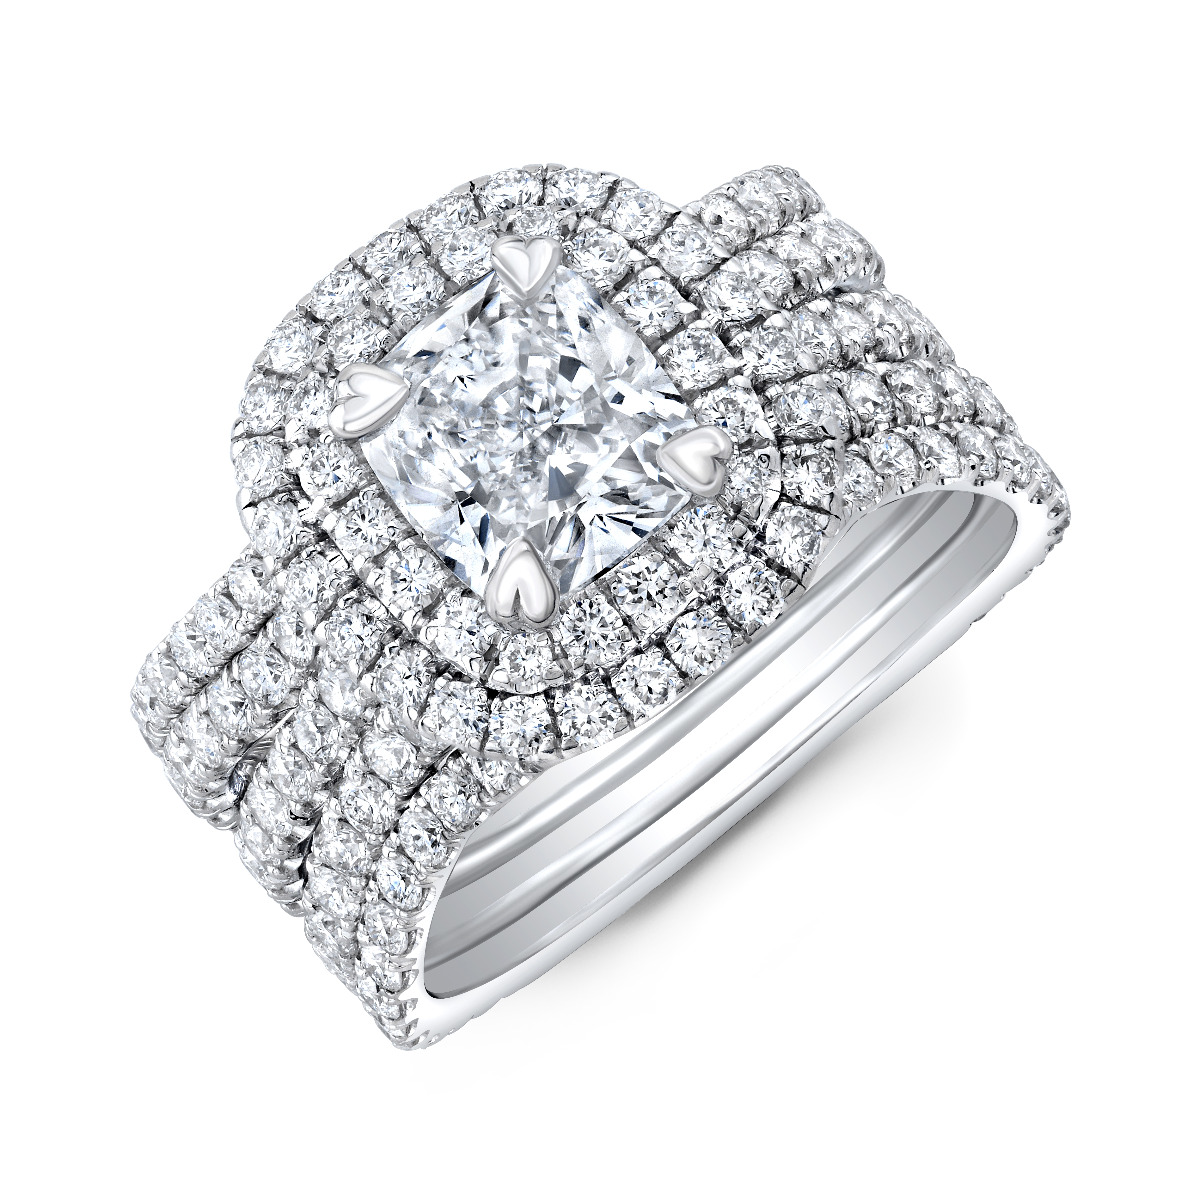 Double Halo 5 Row Curved Shank Diamond Engagement Ring